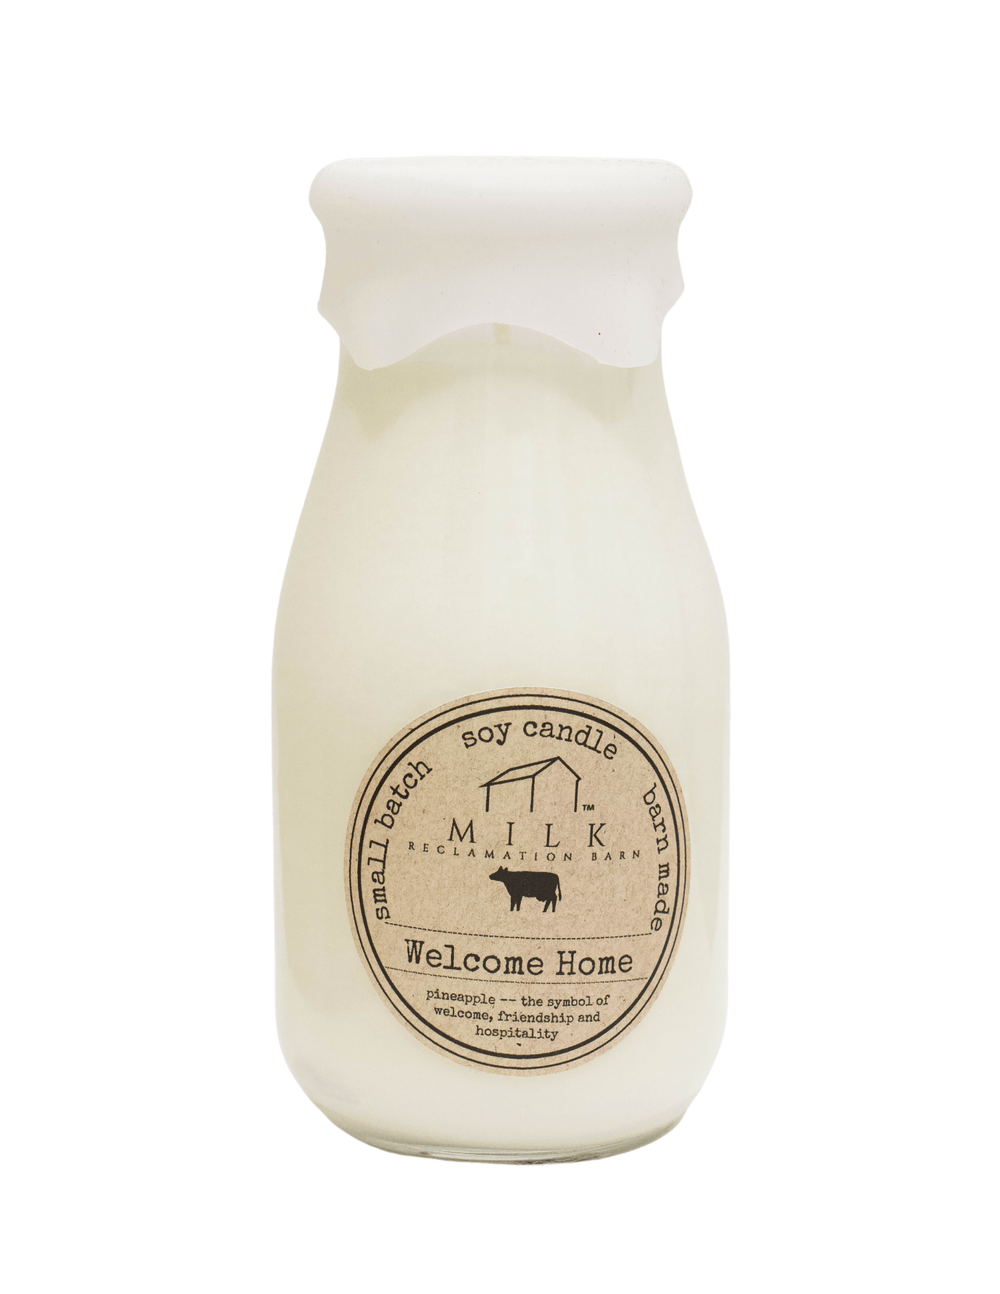 MILK RECLAMATION BARN Candles Milk Bottle Candle in Welcome Home